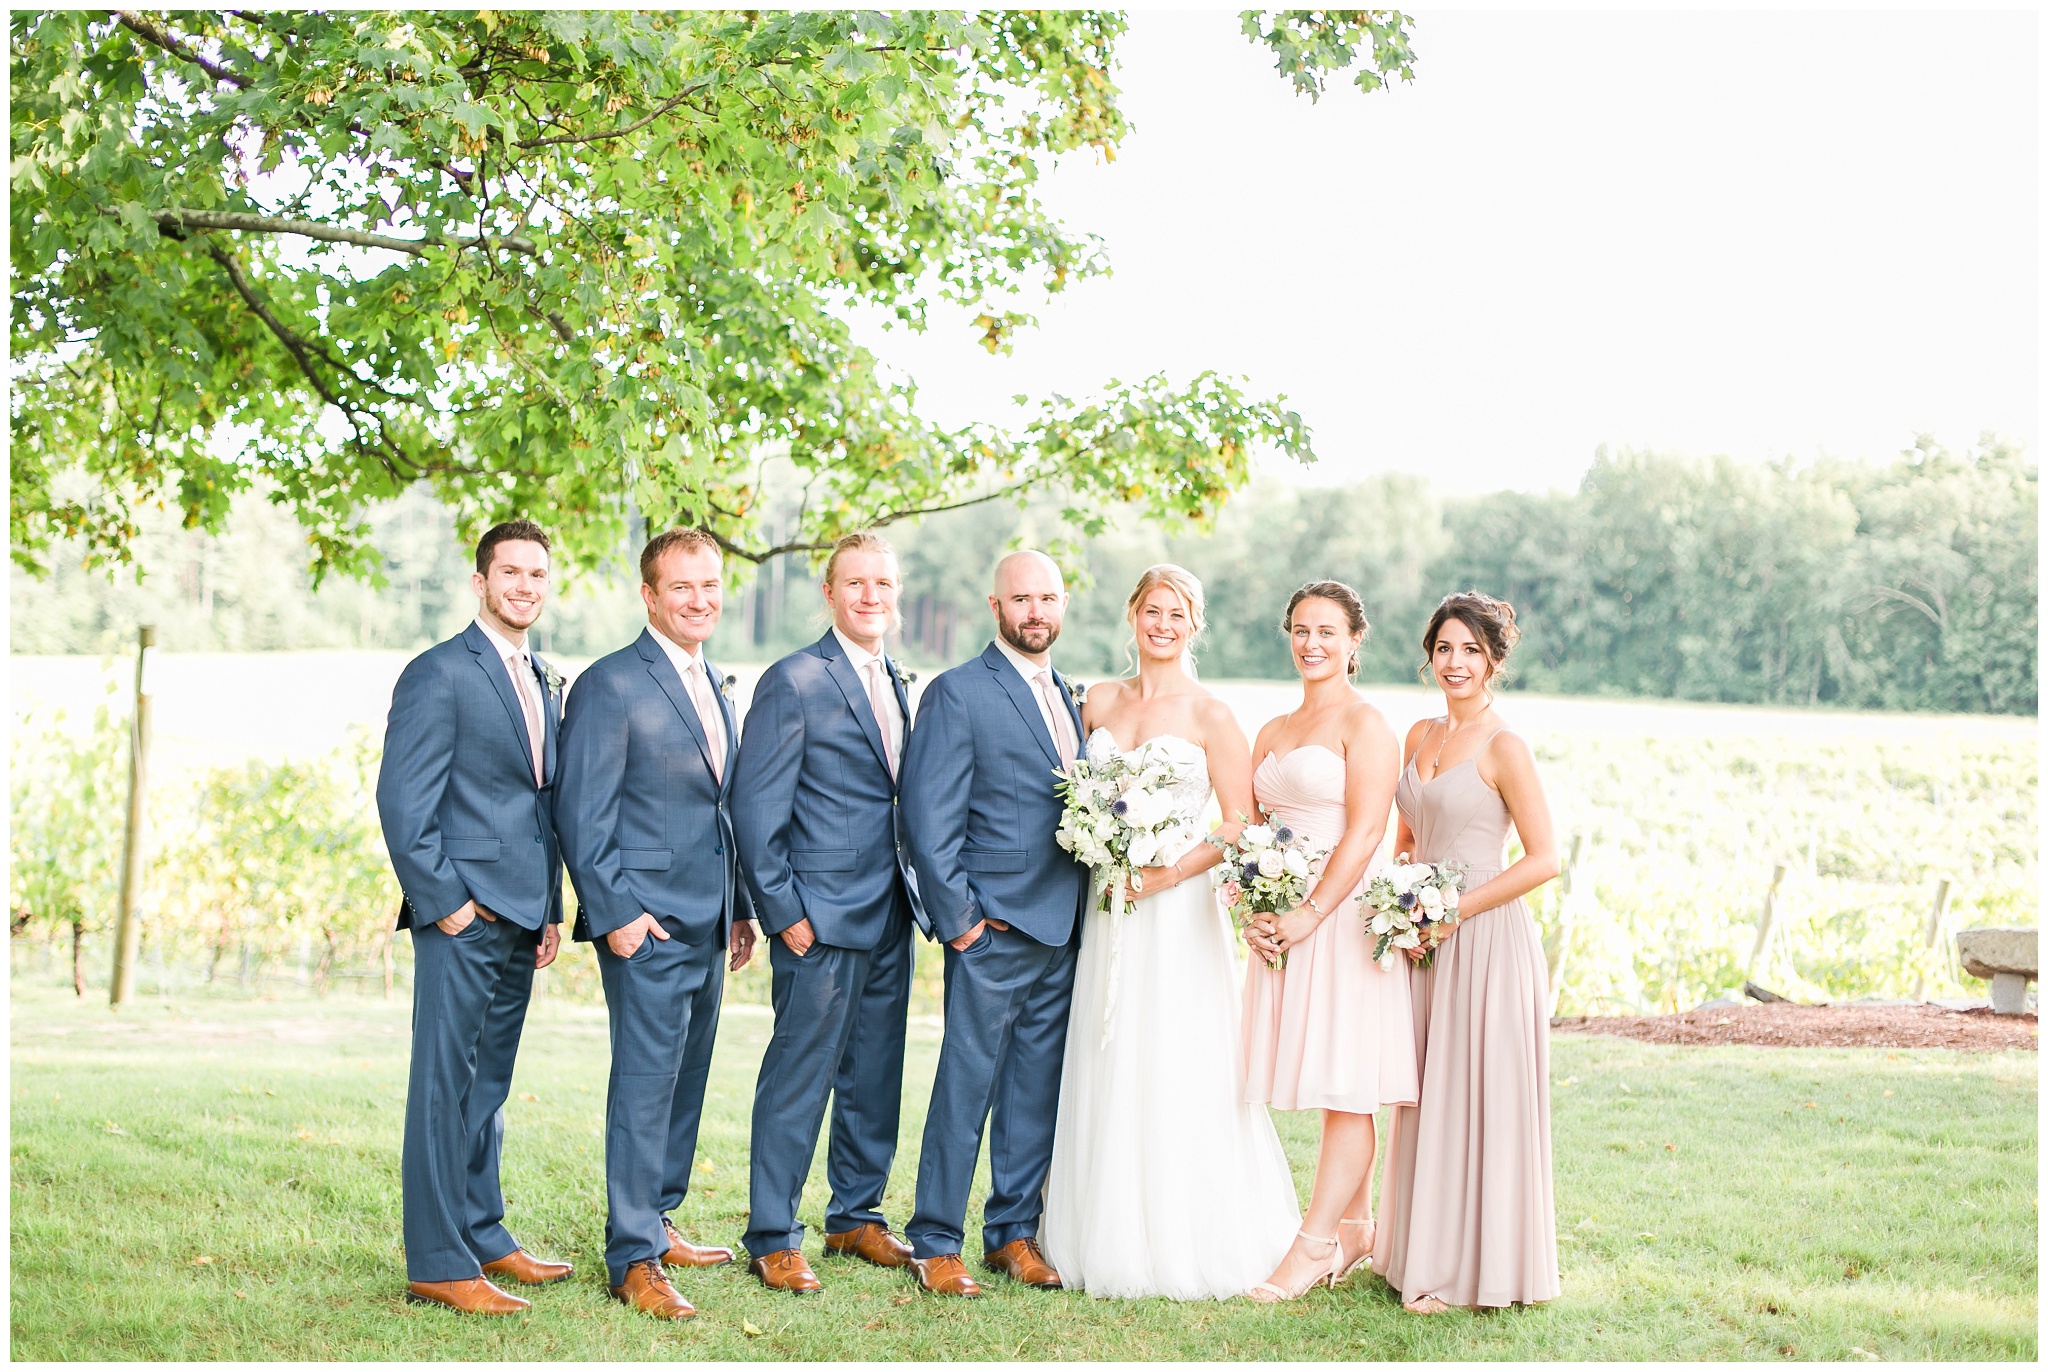 New Hampshire Wedding Photographer | Amy Brown Photography | Flag Hill Winery Outdoor NH Wedding 